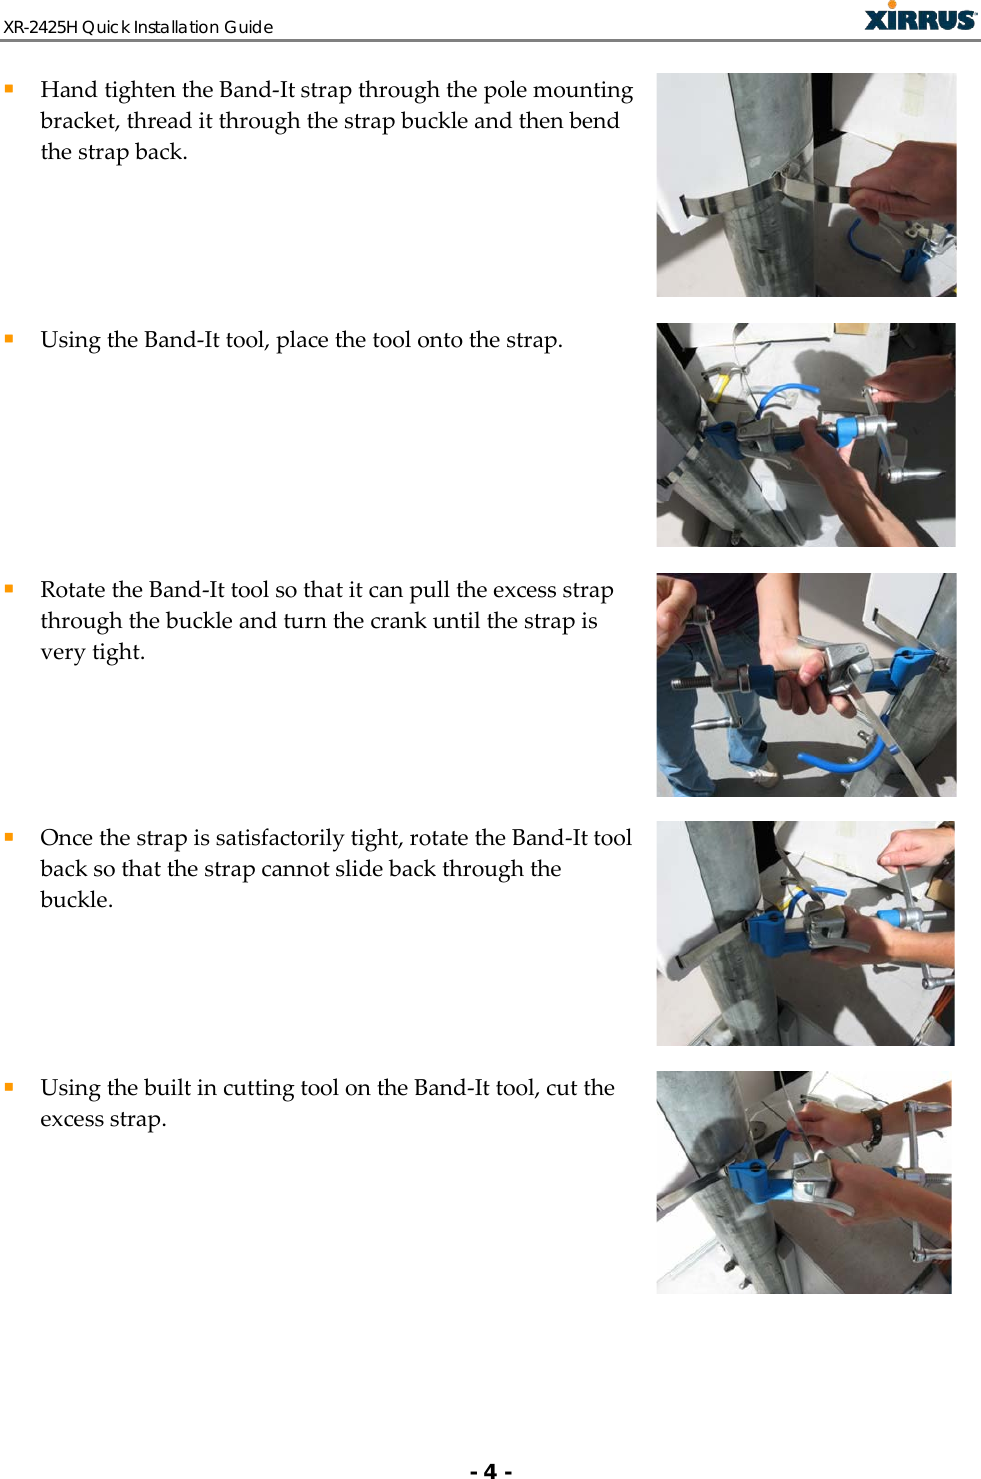 XR-2425H Quick Installation Guide   - 4 -  Hand tighten the Band-It strap through the pole mounting bracket, thread it through the strap buckle and then bend the strap back.   Using the Band-It tool, place the tool onto the strap.   Rotate the Band-It tool so that it can pull the excess strap through the buckle and turn the crank until the strap is very tight.   Once the strap is satisfactorily tight, rotate the Band-It tool back so that the strap cannot slide back through the buckle.   Using the built in cutting tool on the Band-It tool, cut the excess strap.  